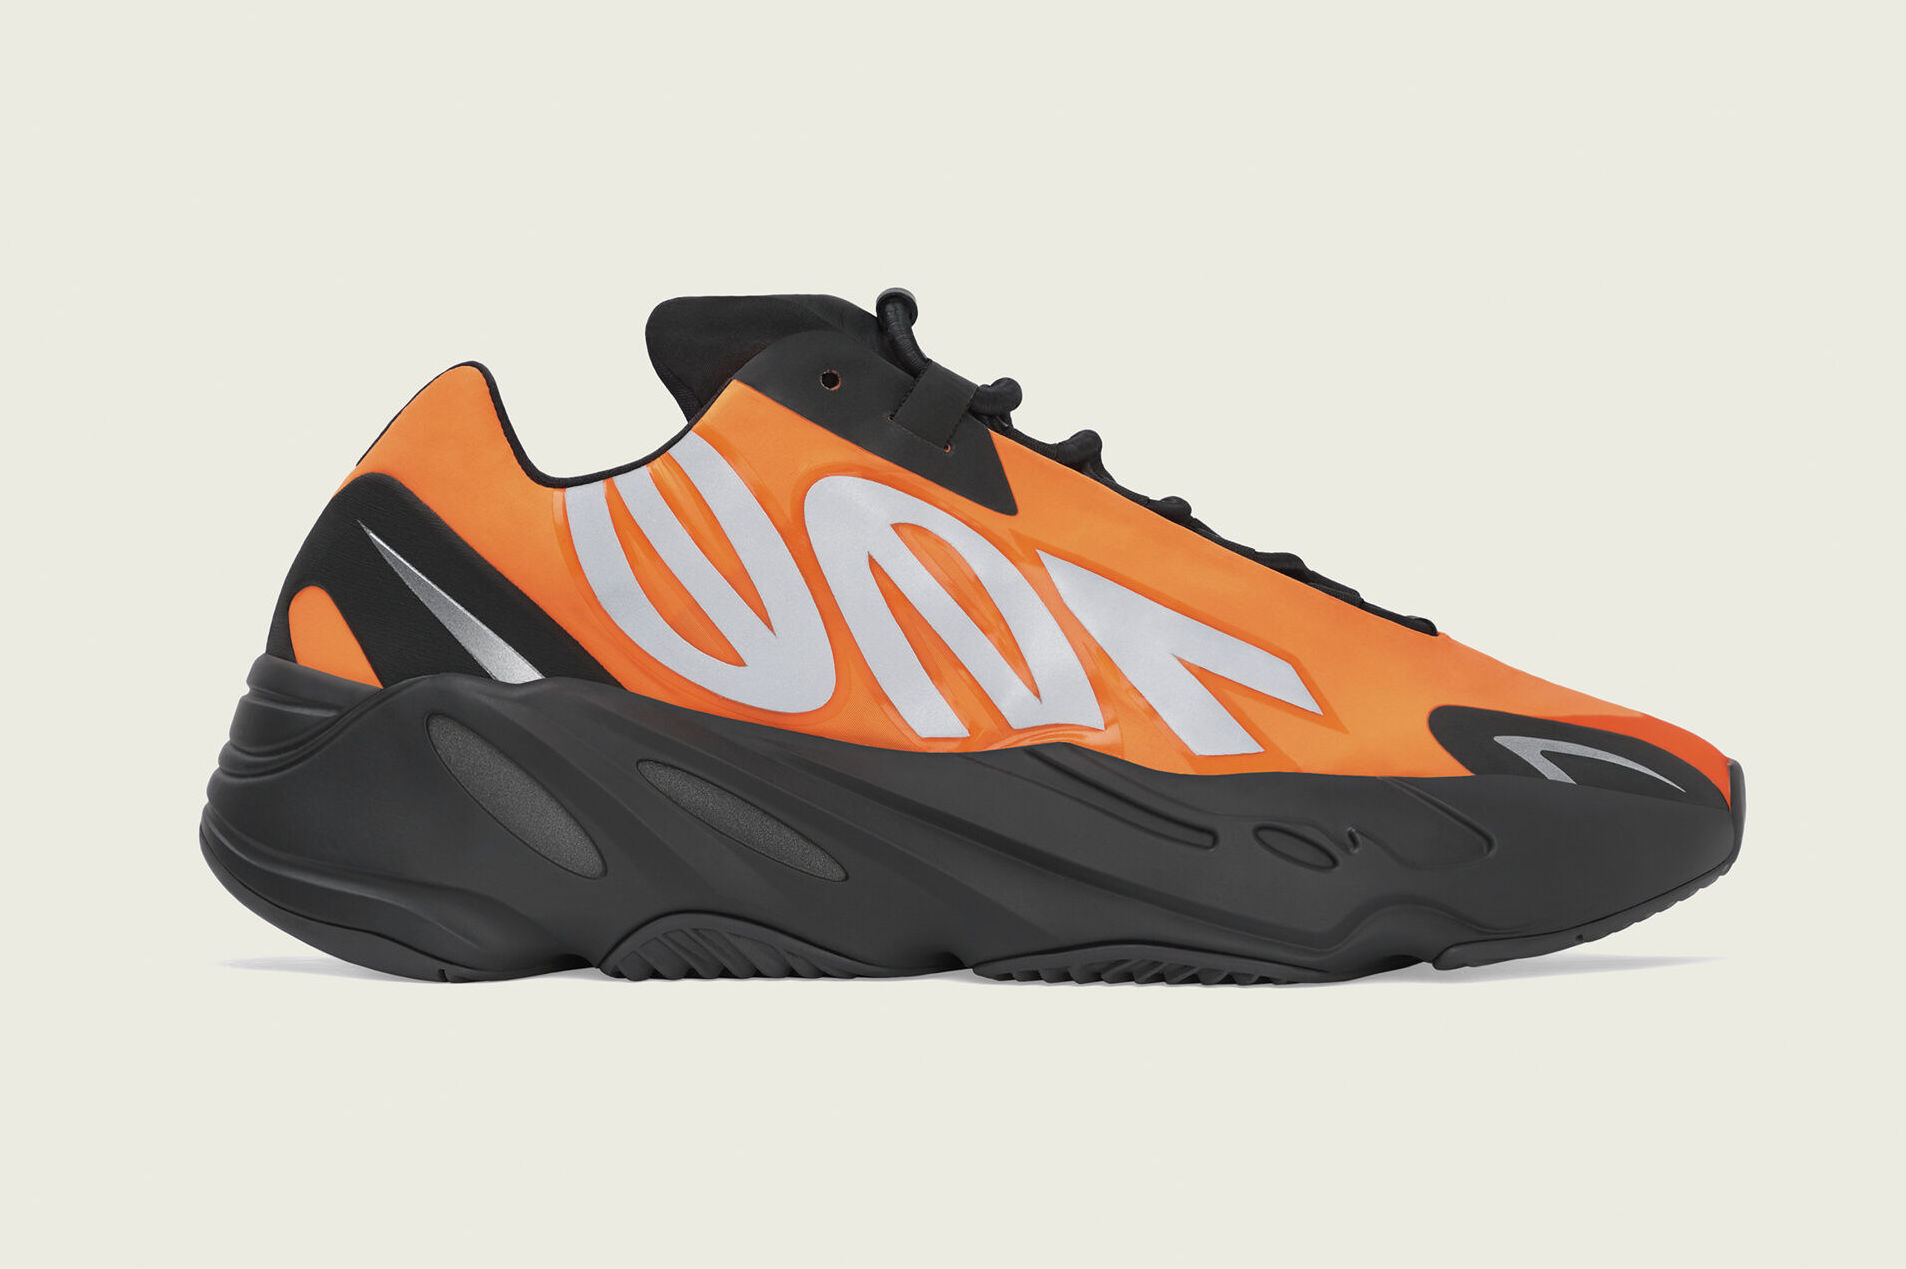 Official Look At The Adidas Yeezy Boost 700 MNVN “Orange”